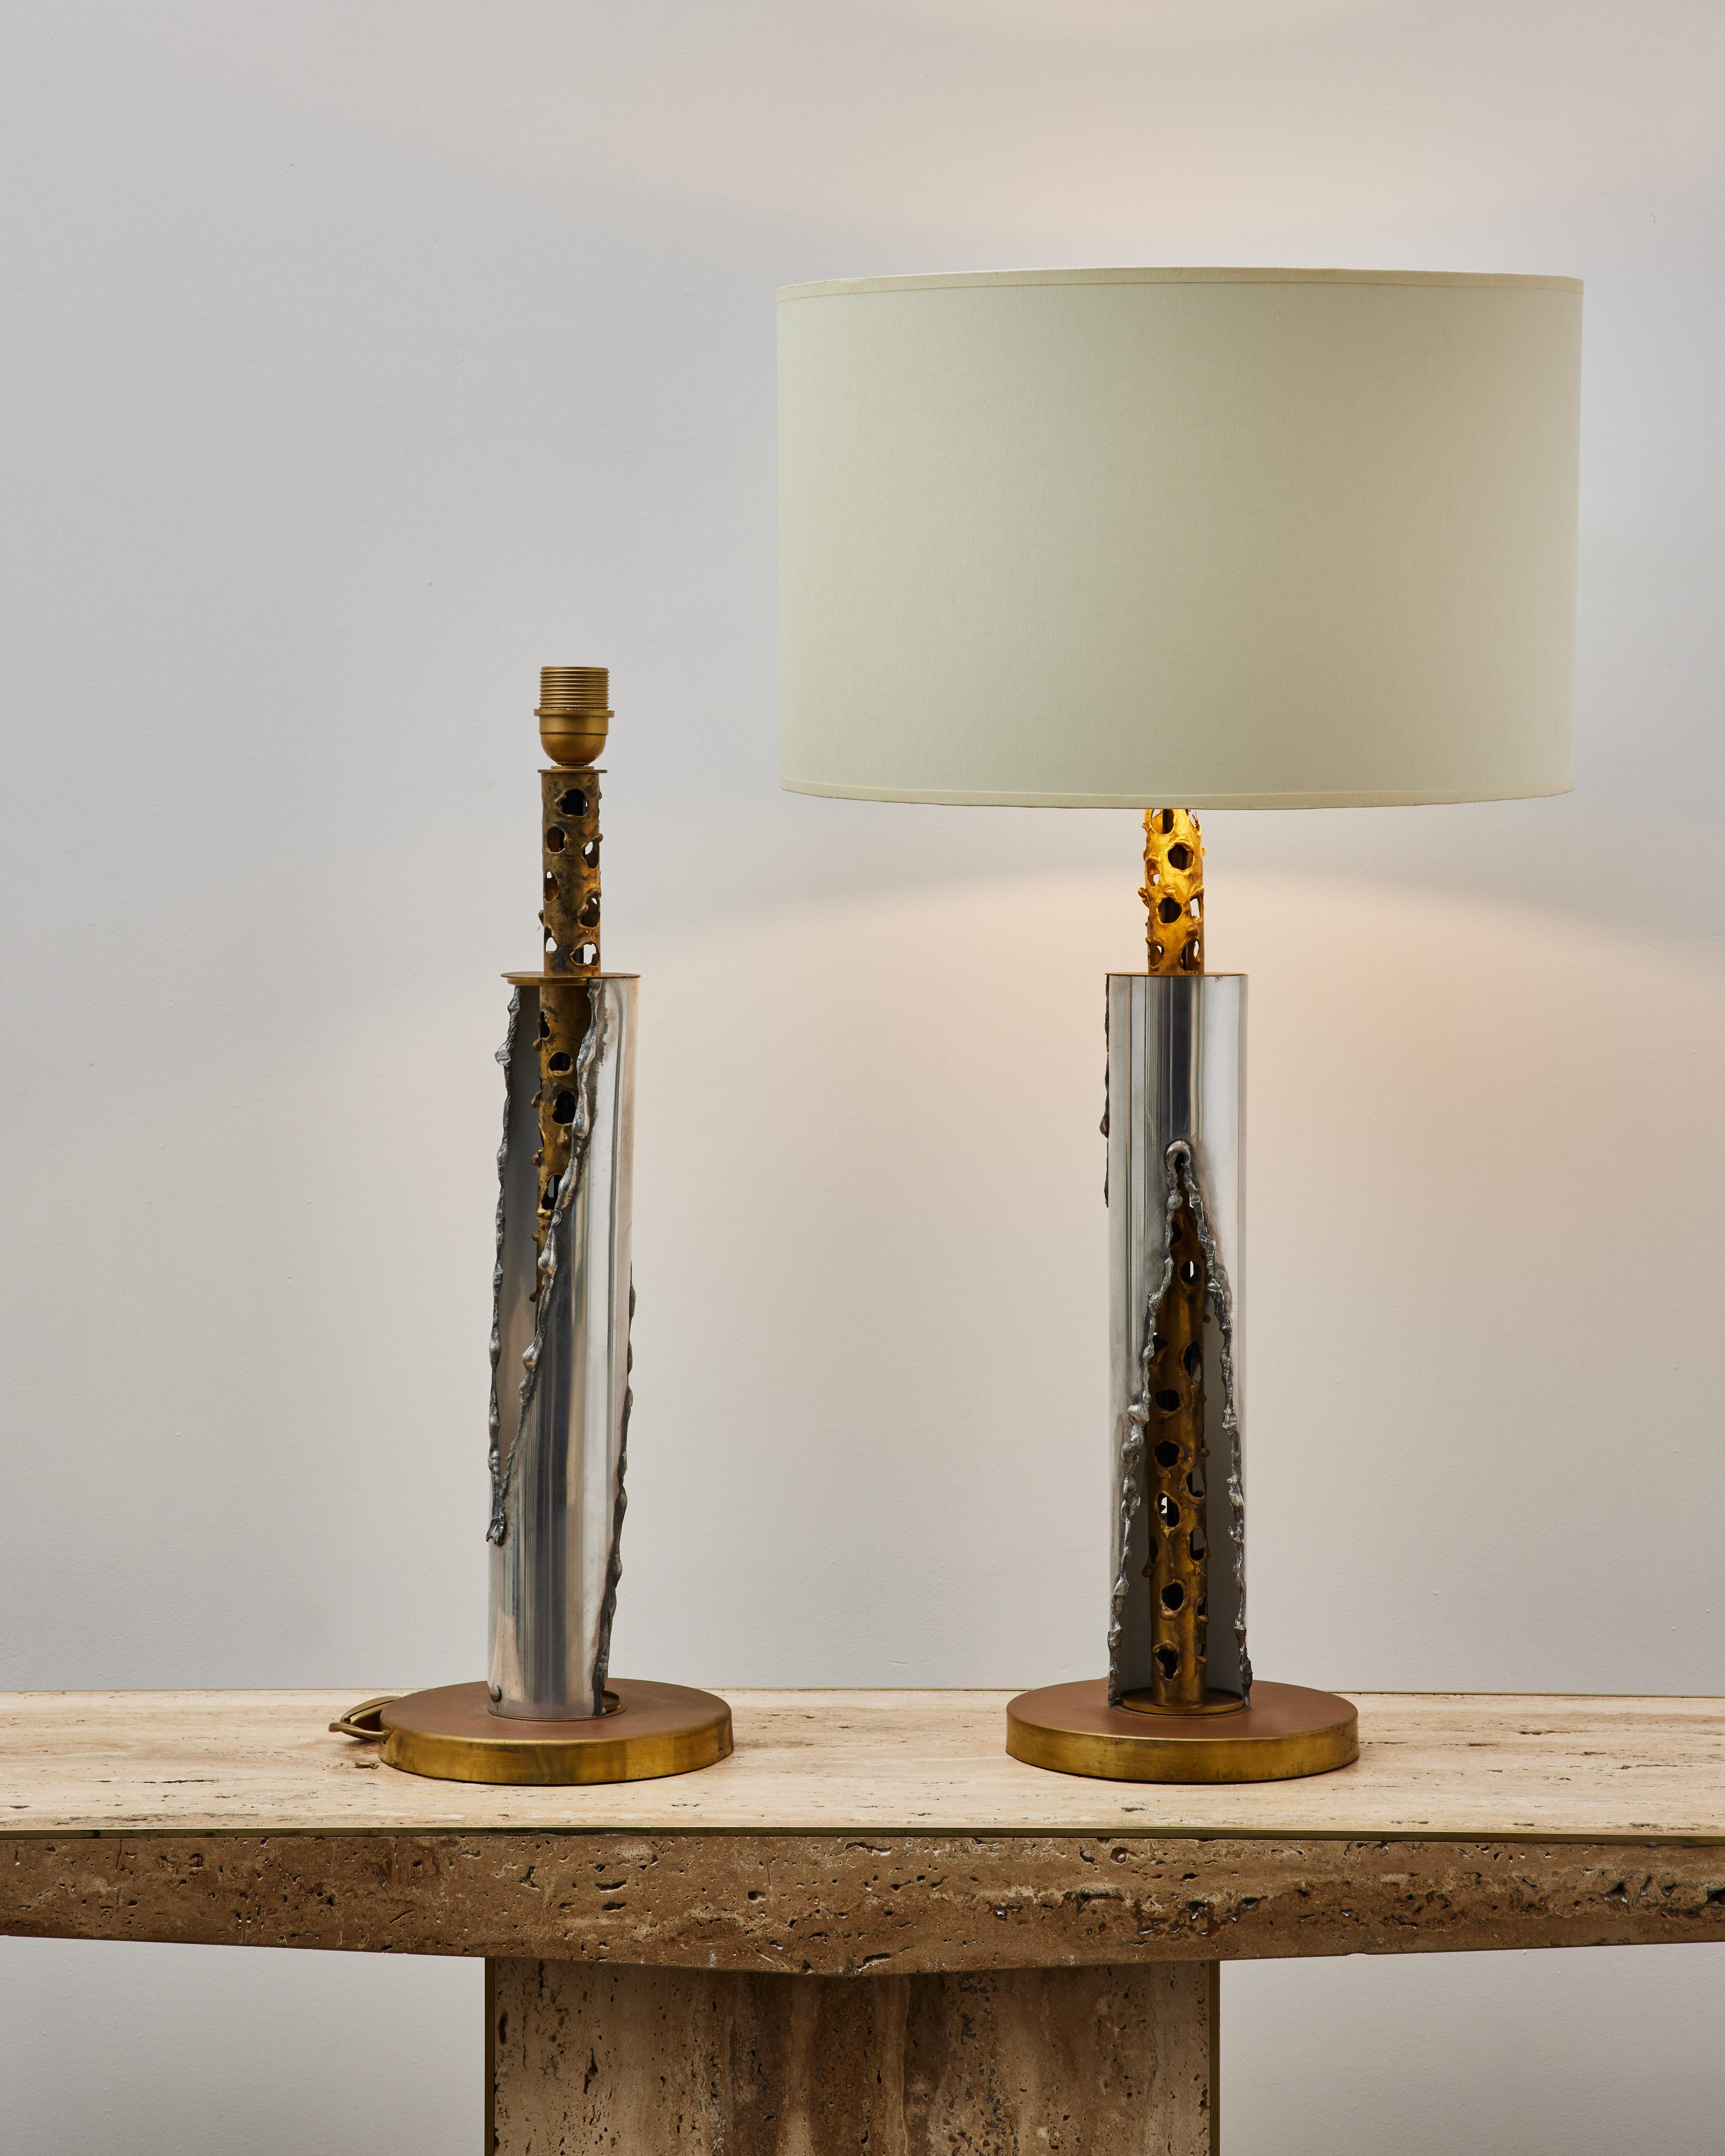 Superb pair of tables lamps in sculpted and patinated brass and steel. 
Creation by Studio Glustin

Price and dimensions without shades.